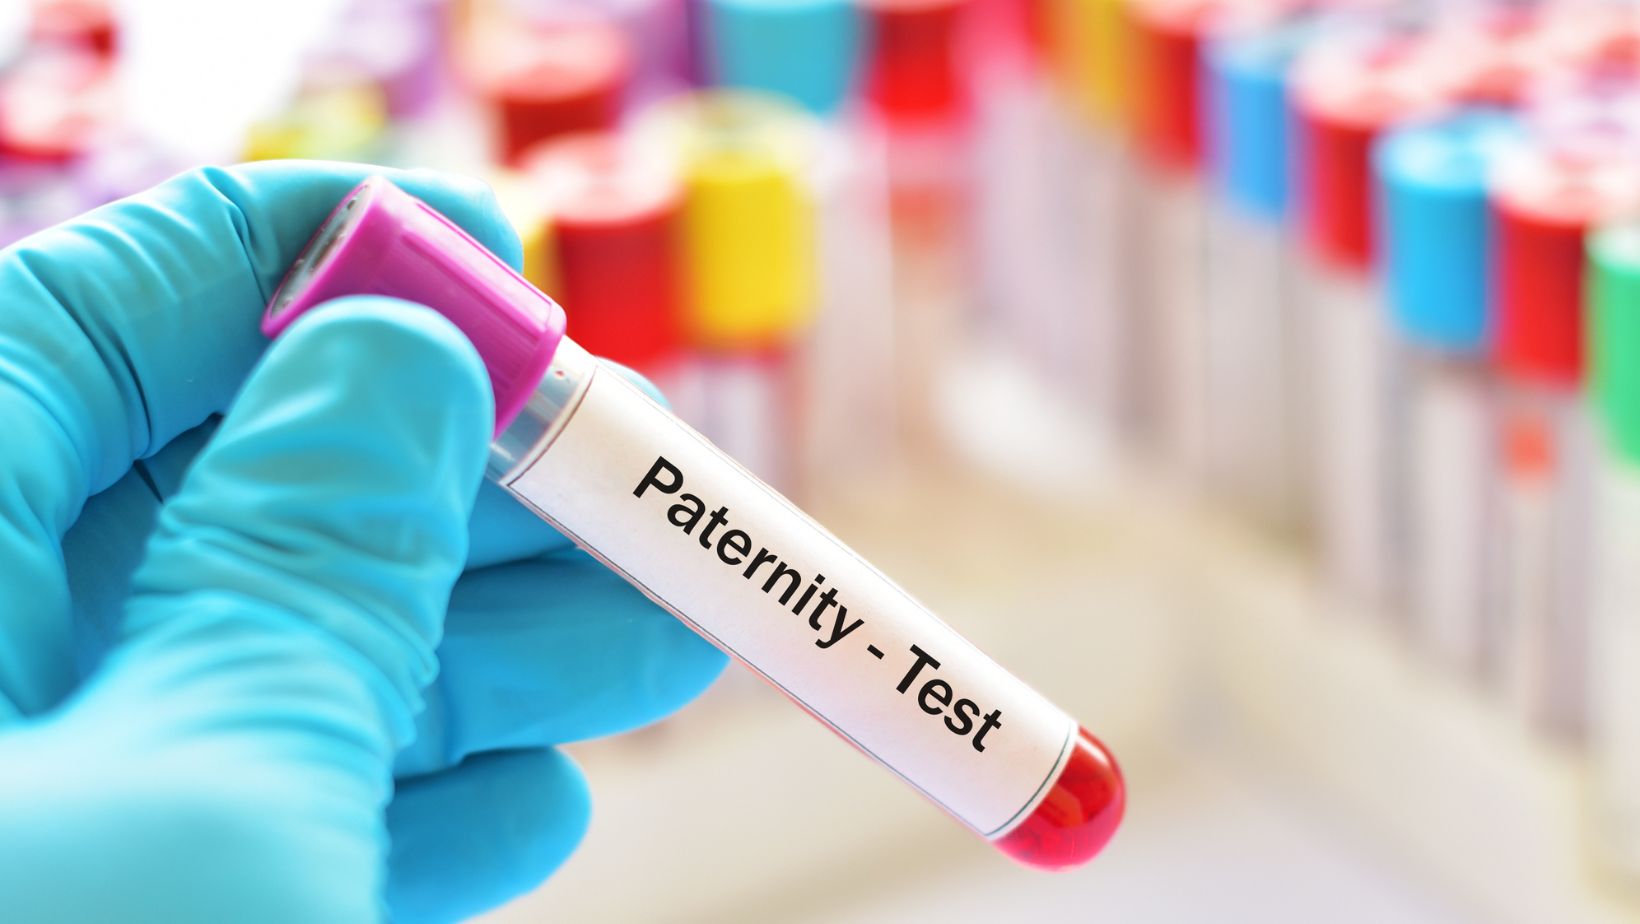 aita for telling my friend not to get a paternity test